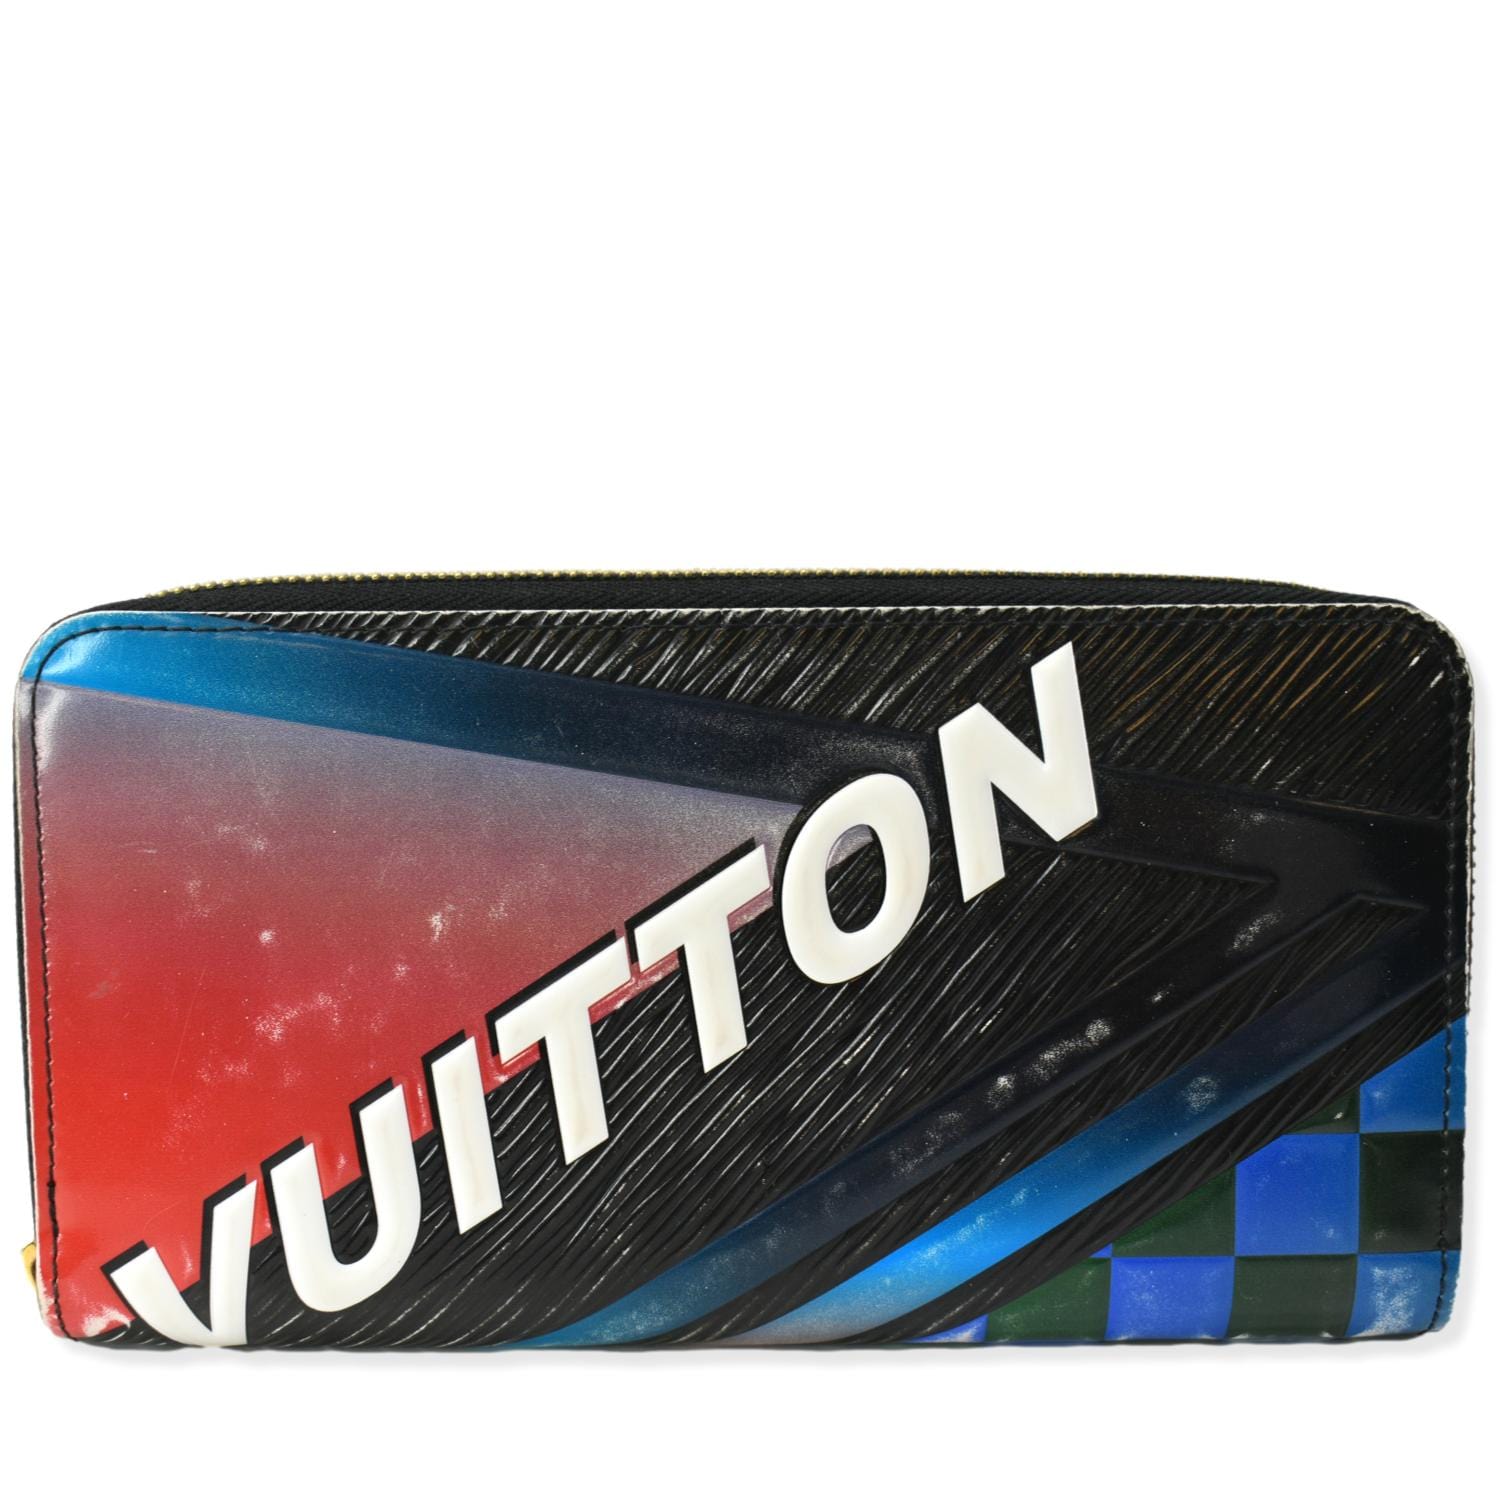 louis-vuitton limited edition wallet